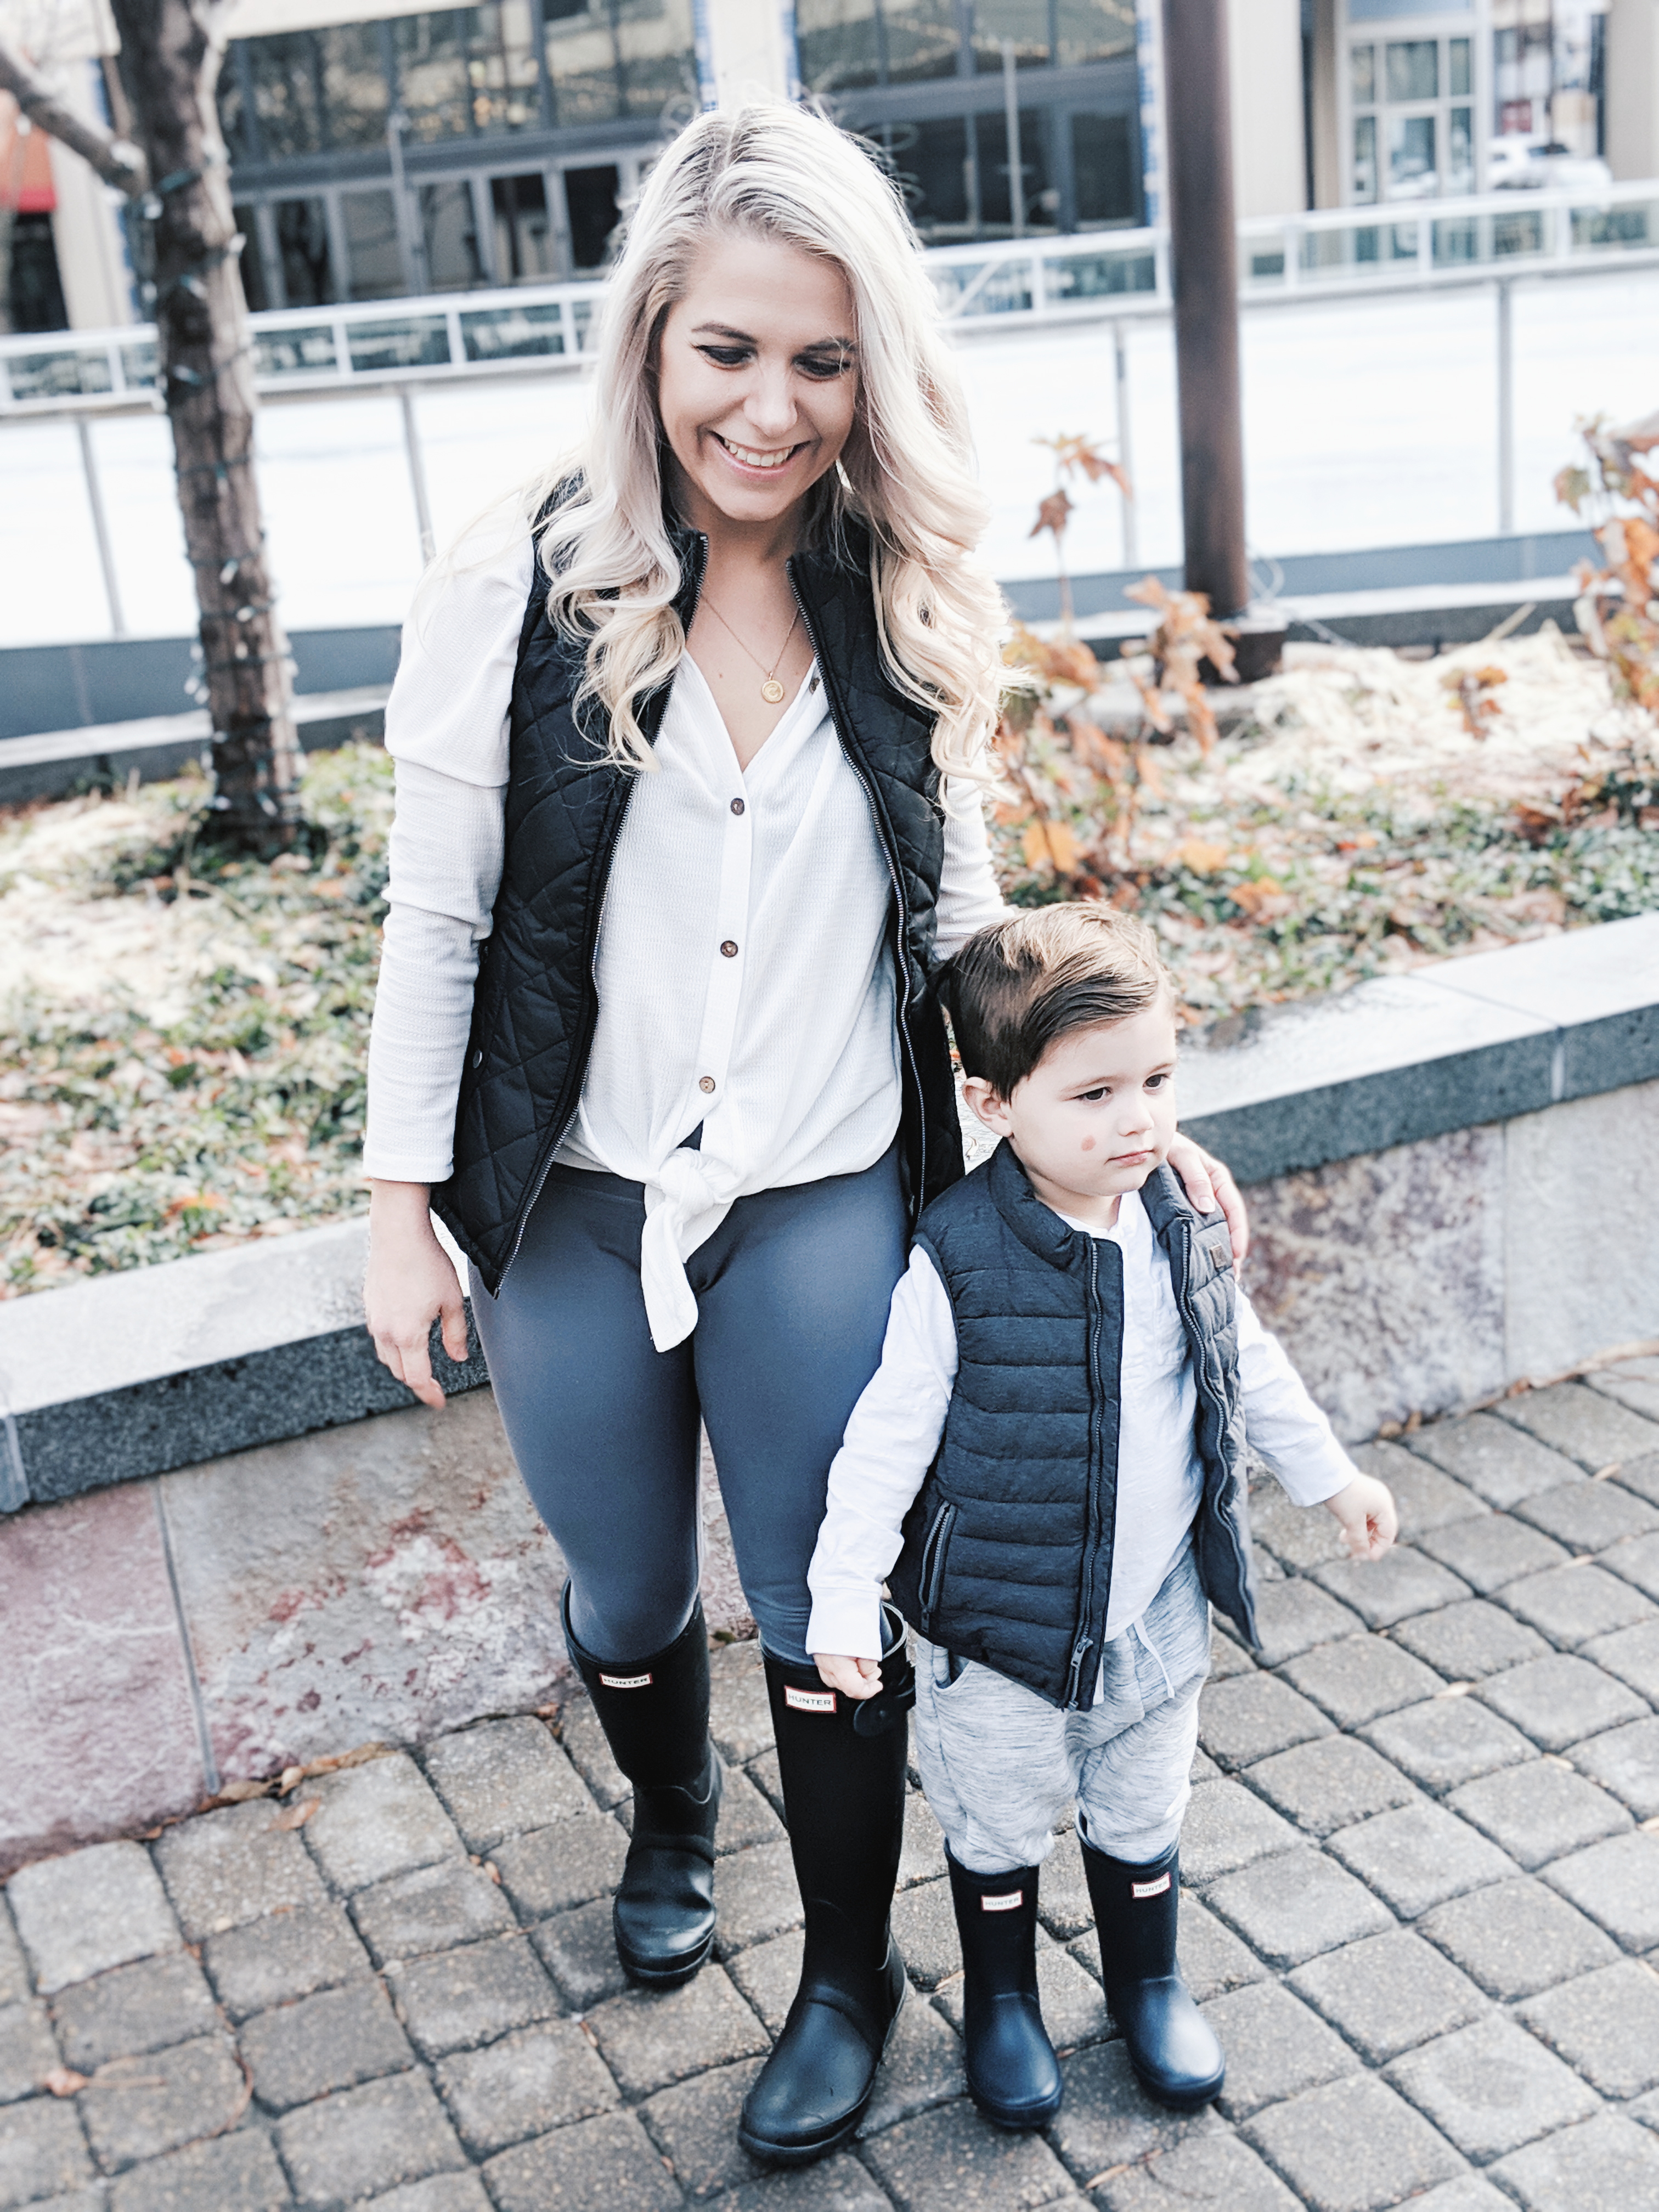 Mommy and Me Outfits - Winter Style: Fashion blogger Tricia Nibarger of COVET by tricia showcases twinning looks for the winter! Find the cutest mommy and me fashion for boy moms or girl moms with these matching puffer vests, henleys, and Hunter boots. Casual winter style for moms. #MommyandMe #MomLife #Twinning